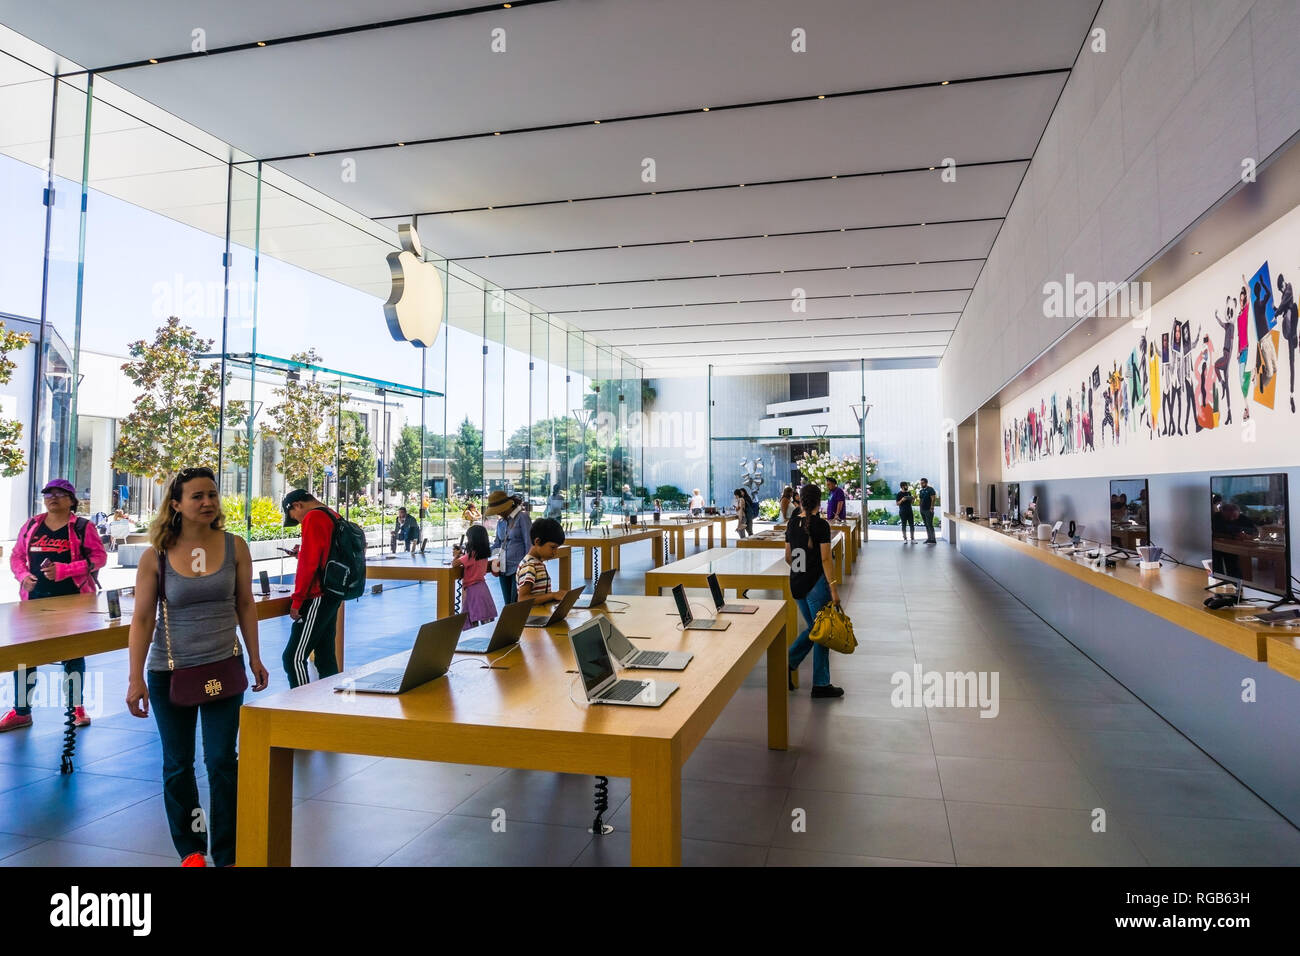 August 2, 2018 Palo Alto / CA / USA - Indoor view of the Apple store located at the open air Stanford shopping center, Silicon Valley Stock Photo